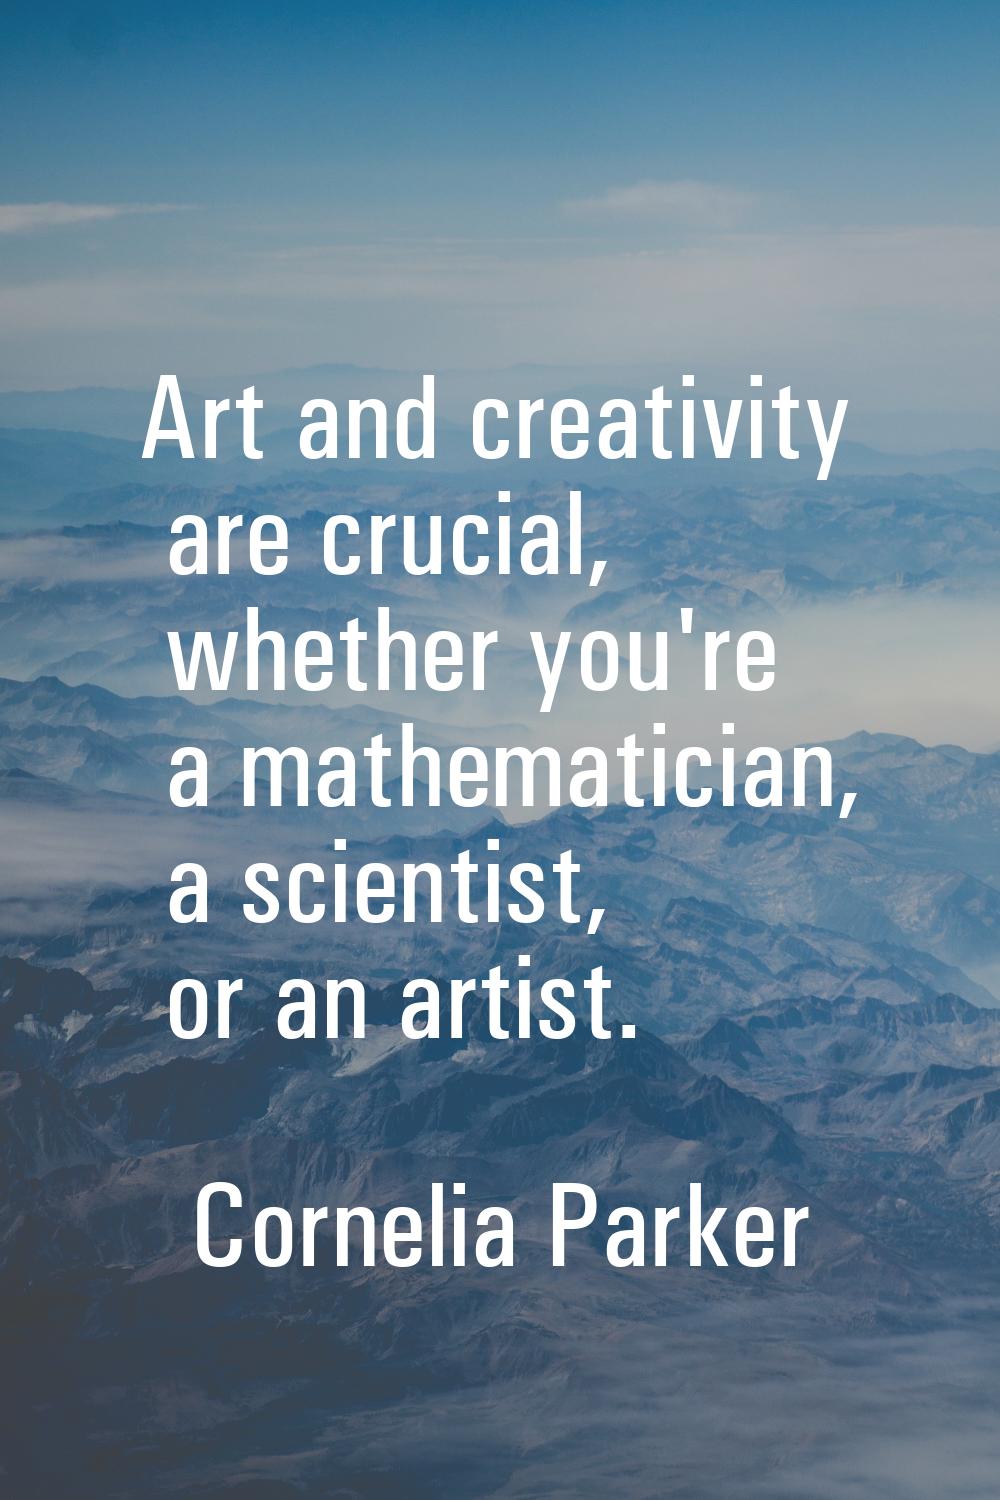 Art and creativity are crucial, whether you're a mathematician, a scientist, or an artist.